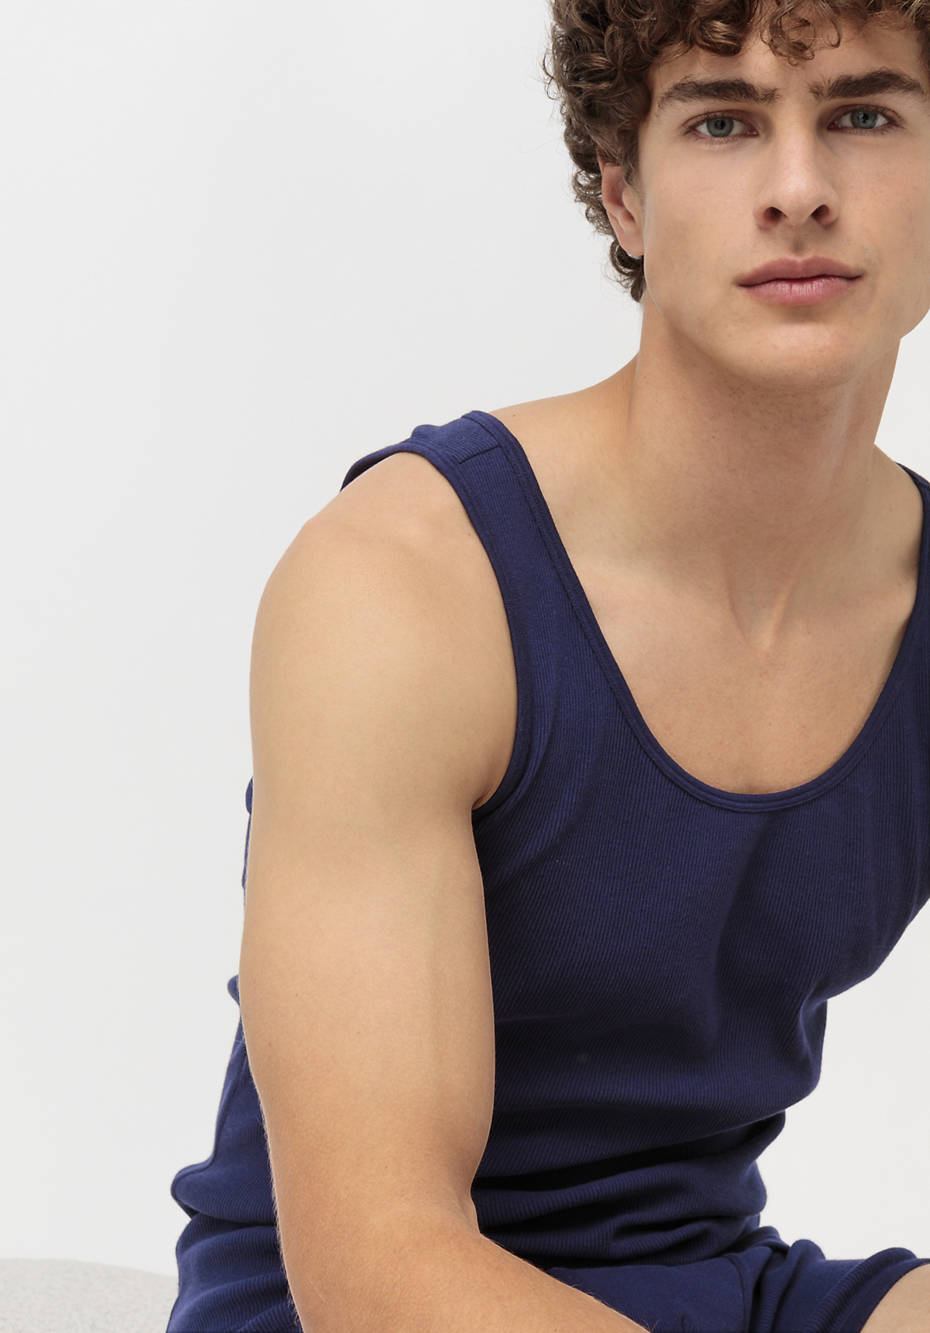 Tank top made from pure organic cotton